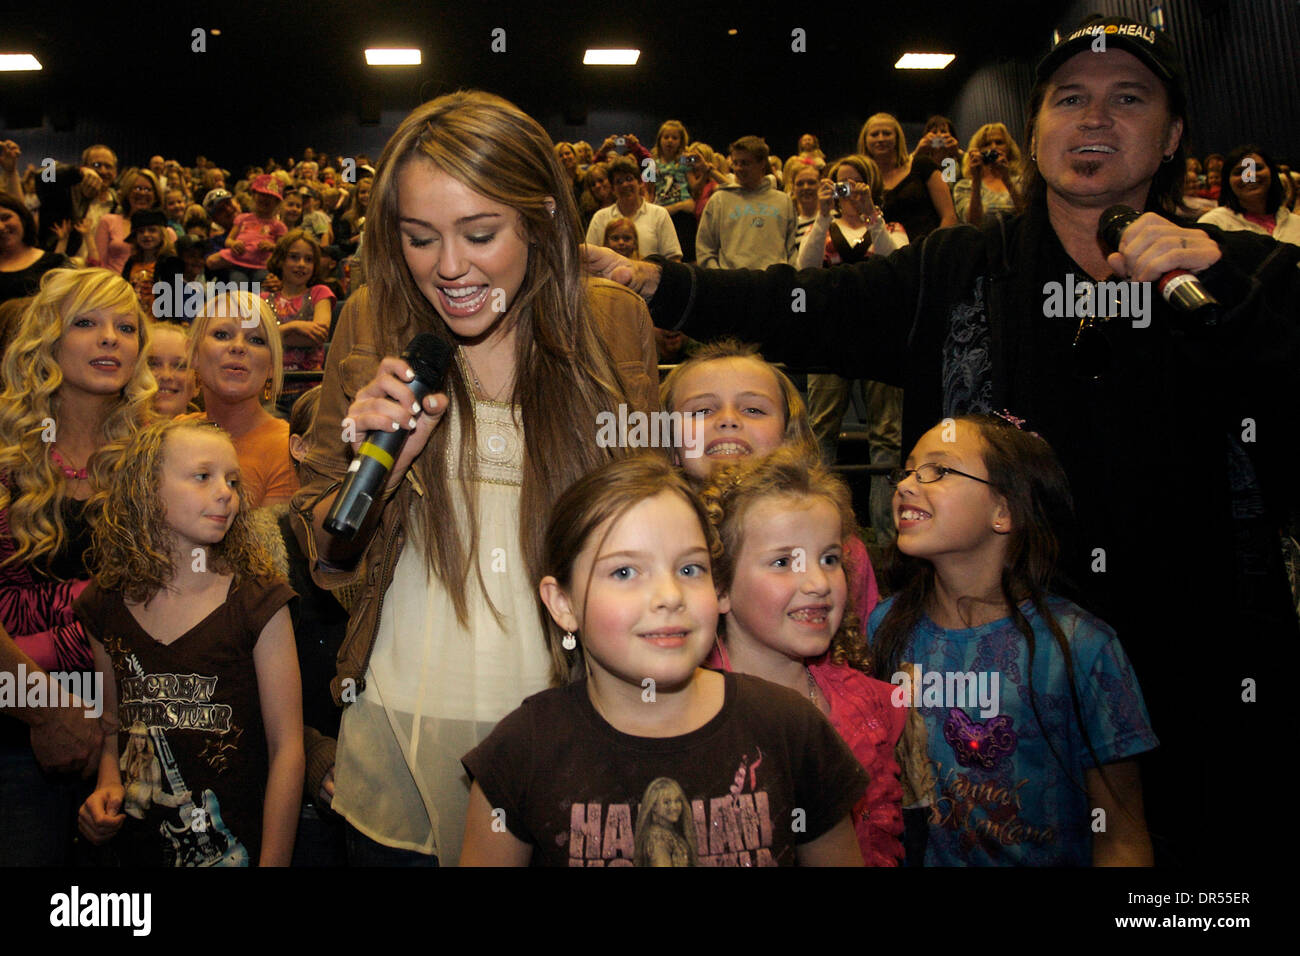 Apr 10, 2009 - Salt Lake City, Utah, USA - MILEY CYRUS and BILLY RAY CYRUS greet fans before the opening of the 'Hannah Montana' movie at the Megaplex 20 at The District. Miley's visit is part of a program by Walt Disney Pictures called 'Opening Weekend Surprise,' where different stars and movie talent visit unsuspecting theater audiences during the opening weekend of a show. Utah  Stock Photo